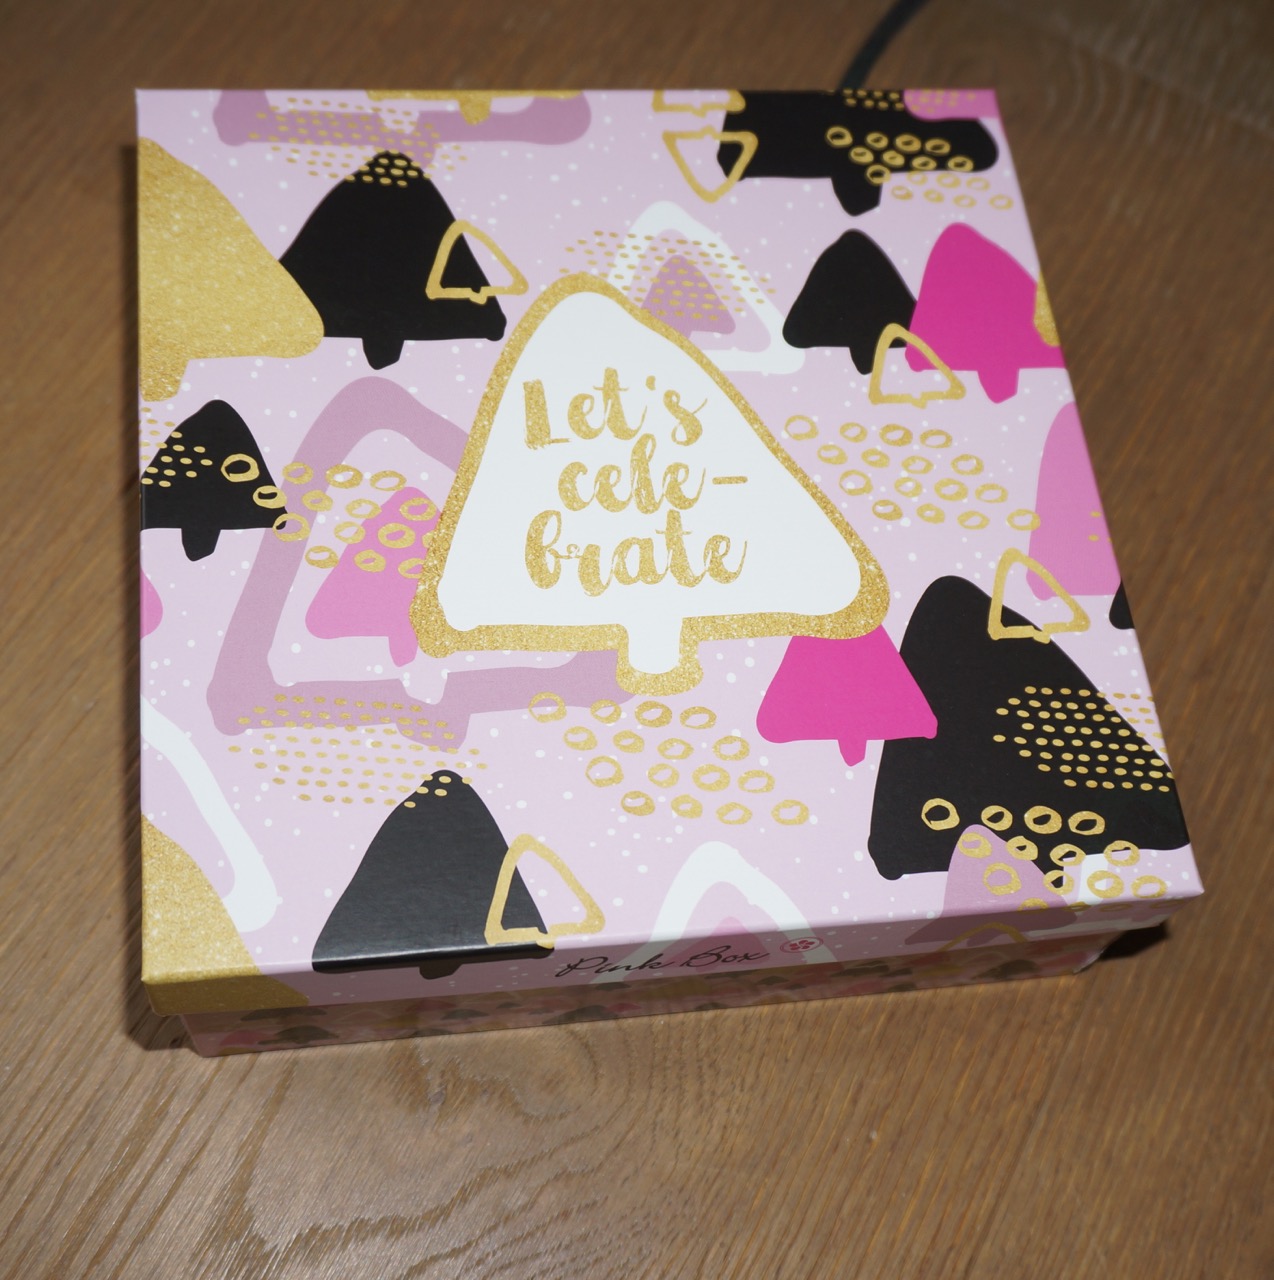 Let´s celebrate – Pink Box Christmas Edition